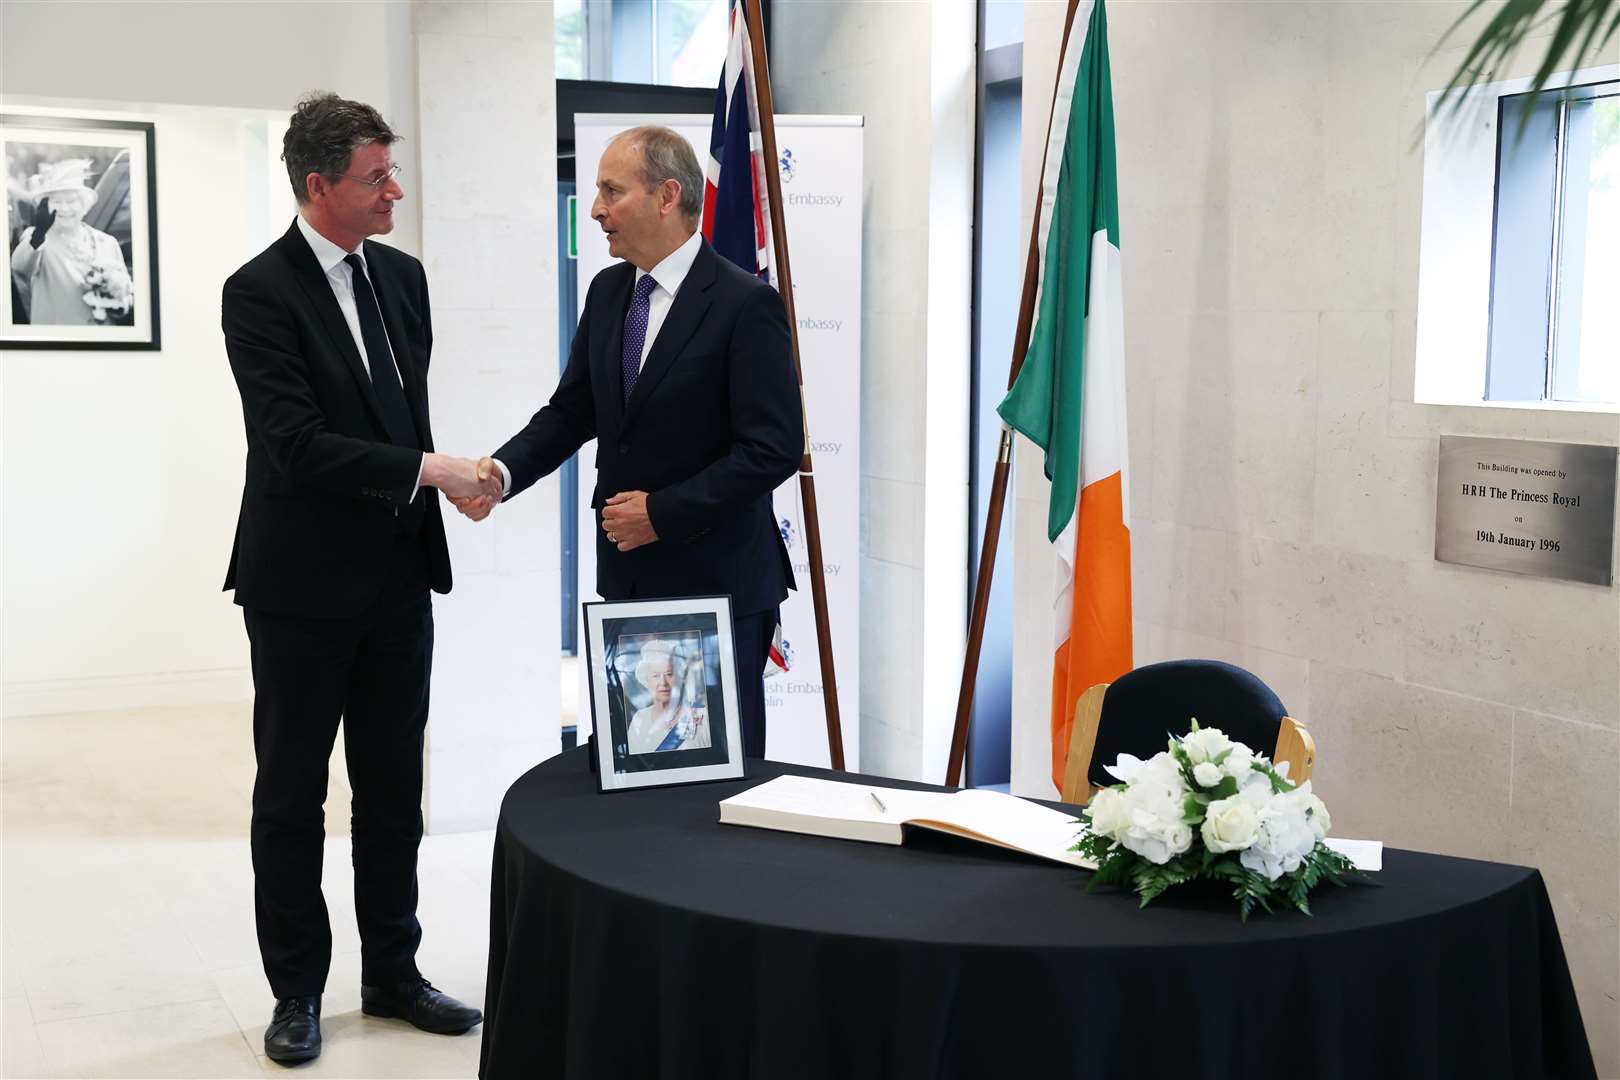 Mr Martin, right, with Paul Johnston, British Ambassador to Ireland, after signing a book of condolence for the Queen in the British Embassy in Dublin (Government Information Service in Ireland/PA)